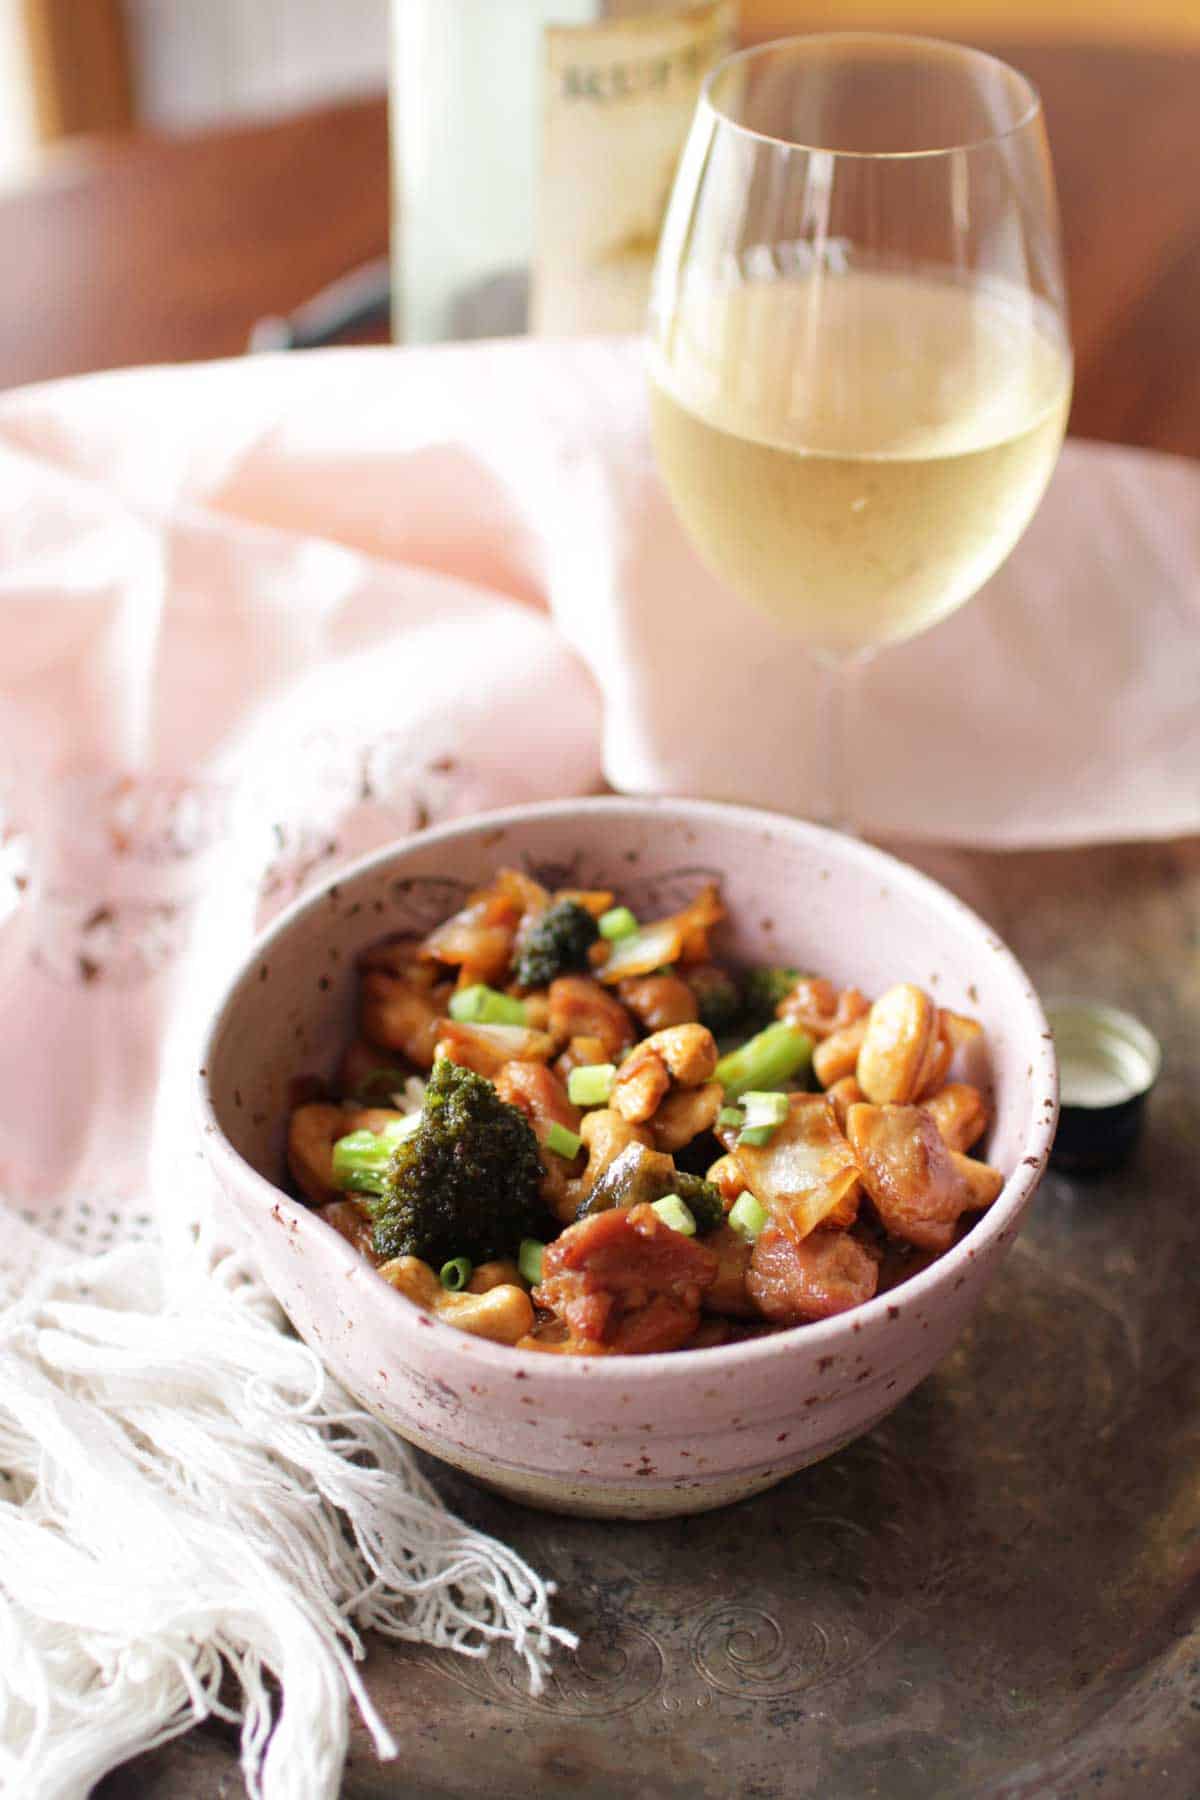 A bowl of cashew chicken next to a glass of white wine on a metal tray